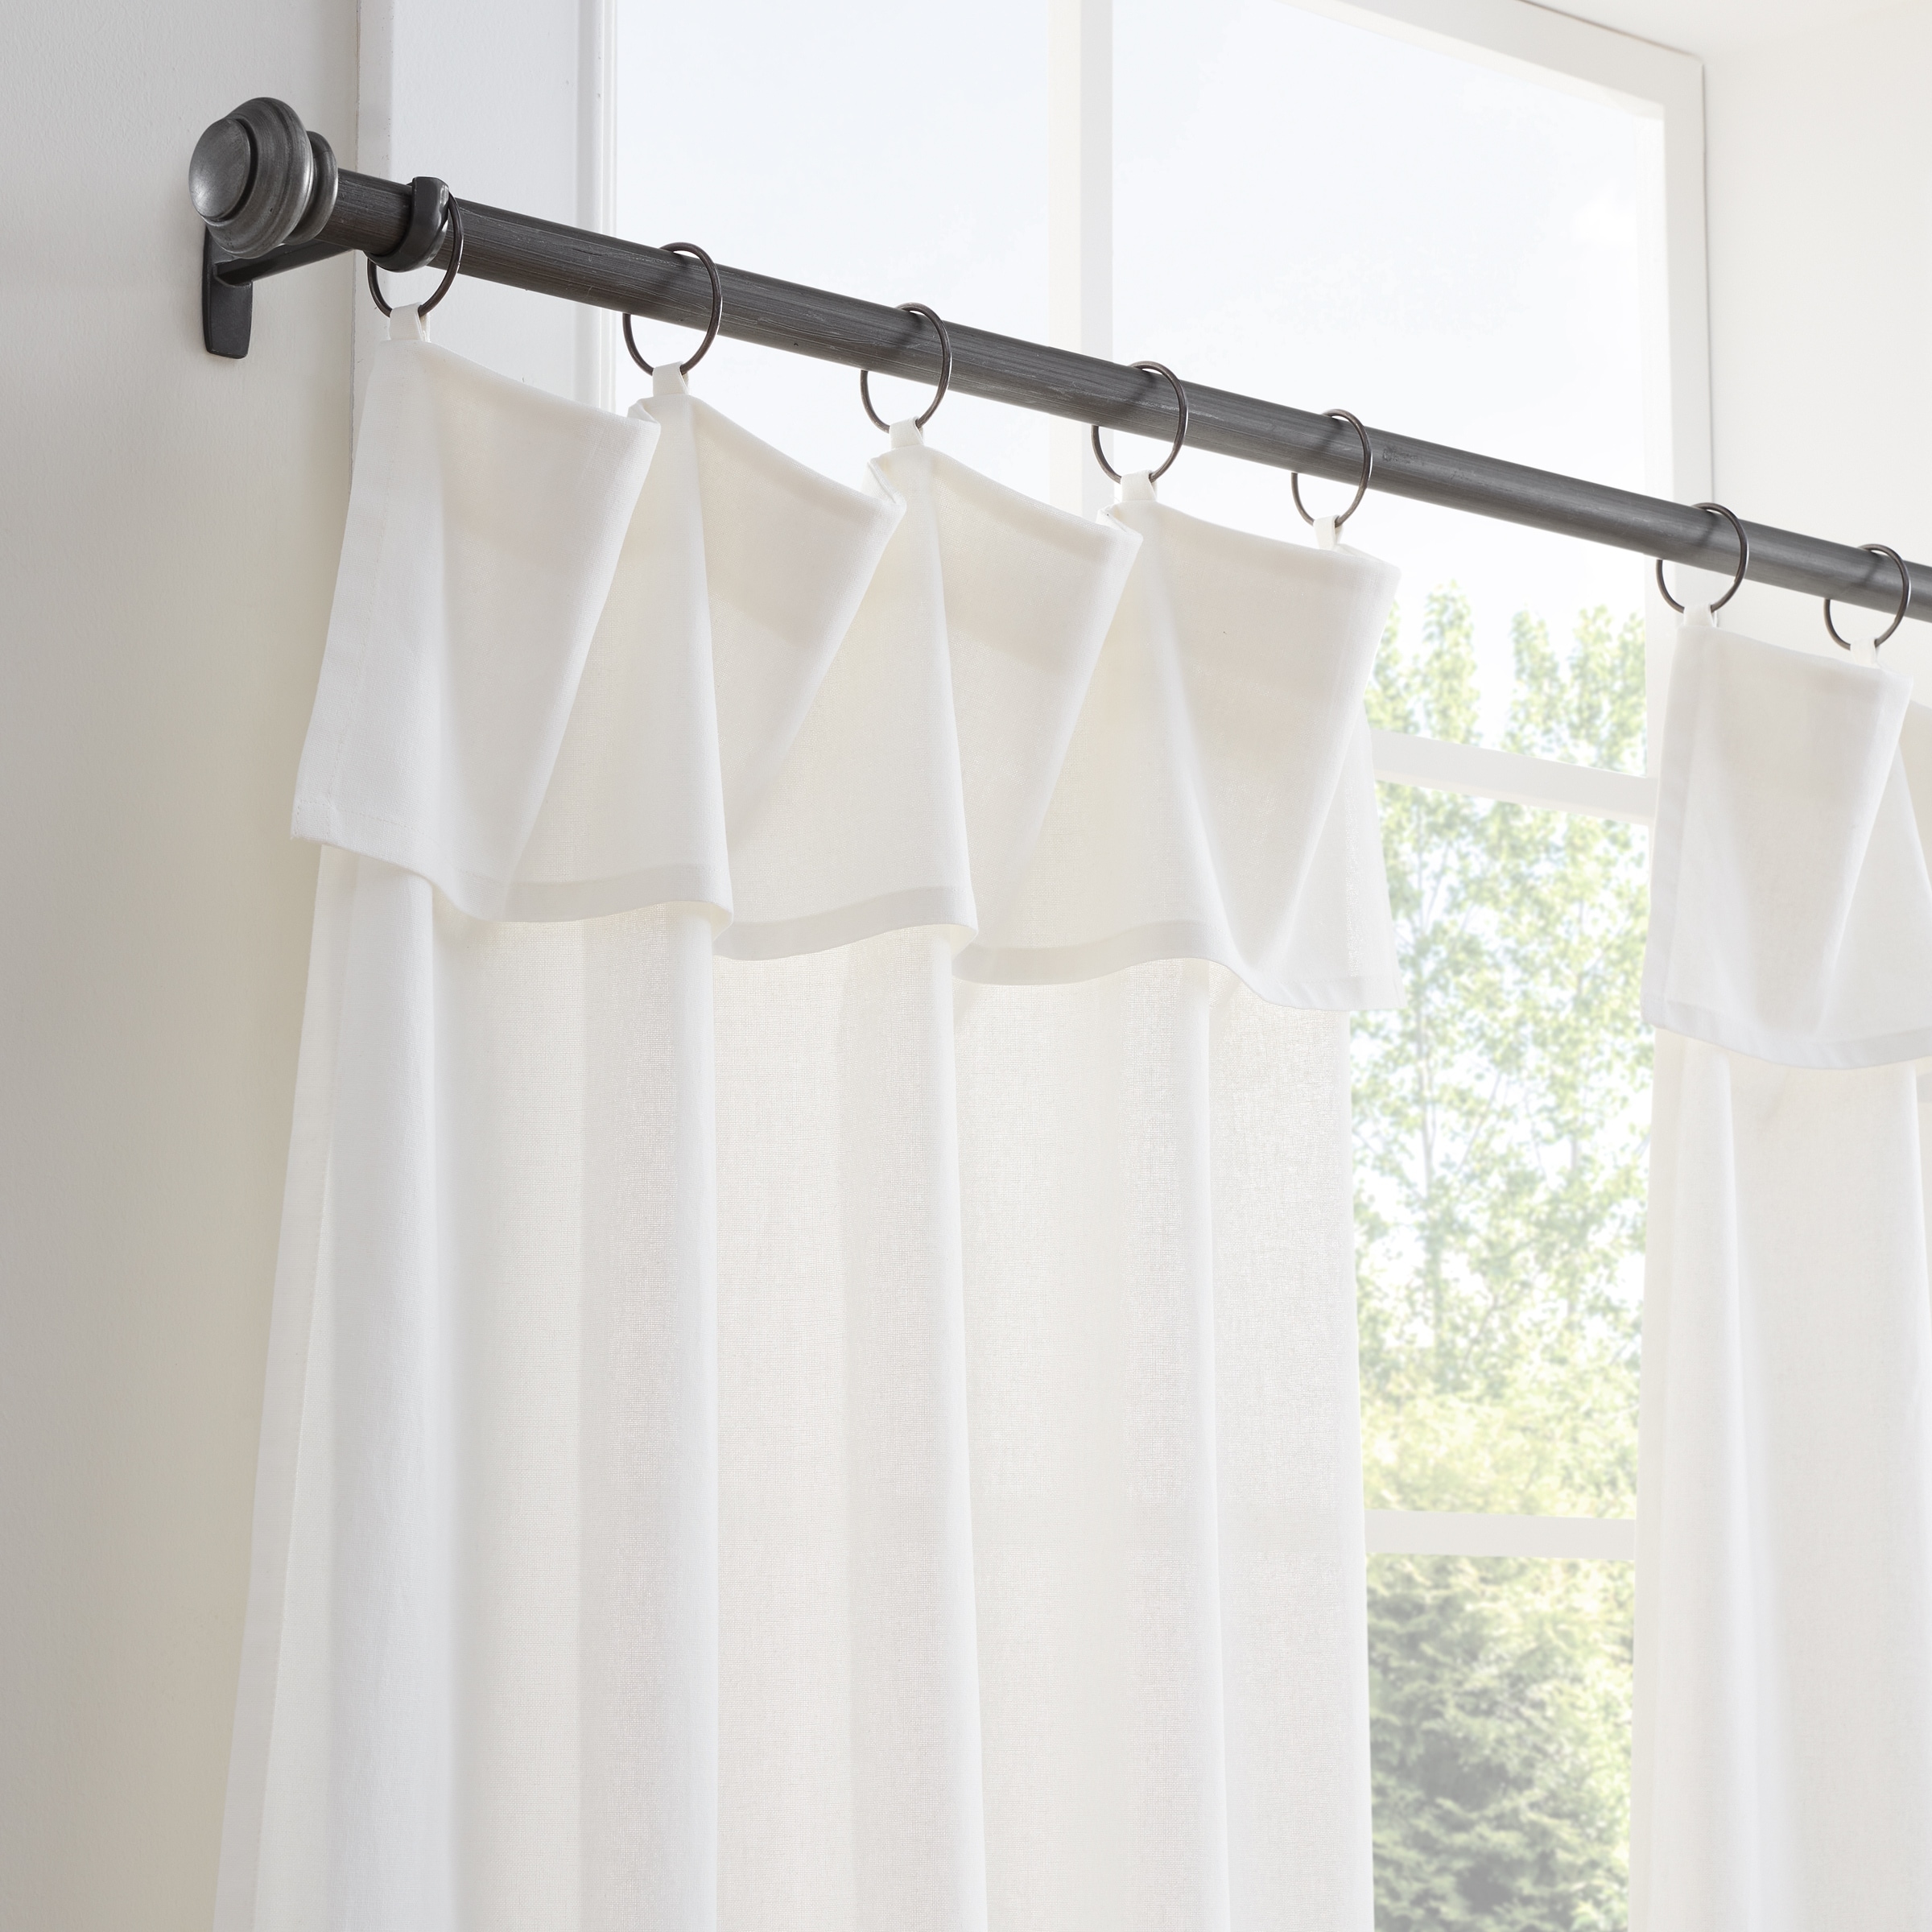 https://ak1.ostkcdn.com/images/products/is/images/direct/819491c8337d7bbb1dbd96e7d04bc15cff74a43b/Mercantile-Drop-Cloth-Tier-Curtain-Panel-Pair-with-Valance%2C-Light-Filtering-Ring-and-Tab-Top%2C-36x30.jpg